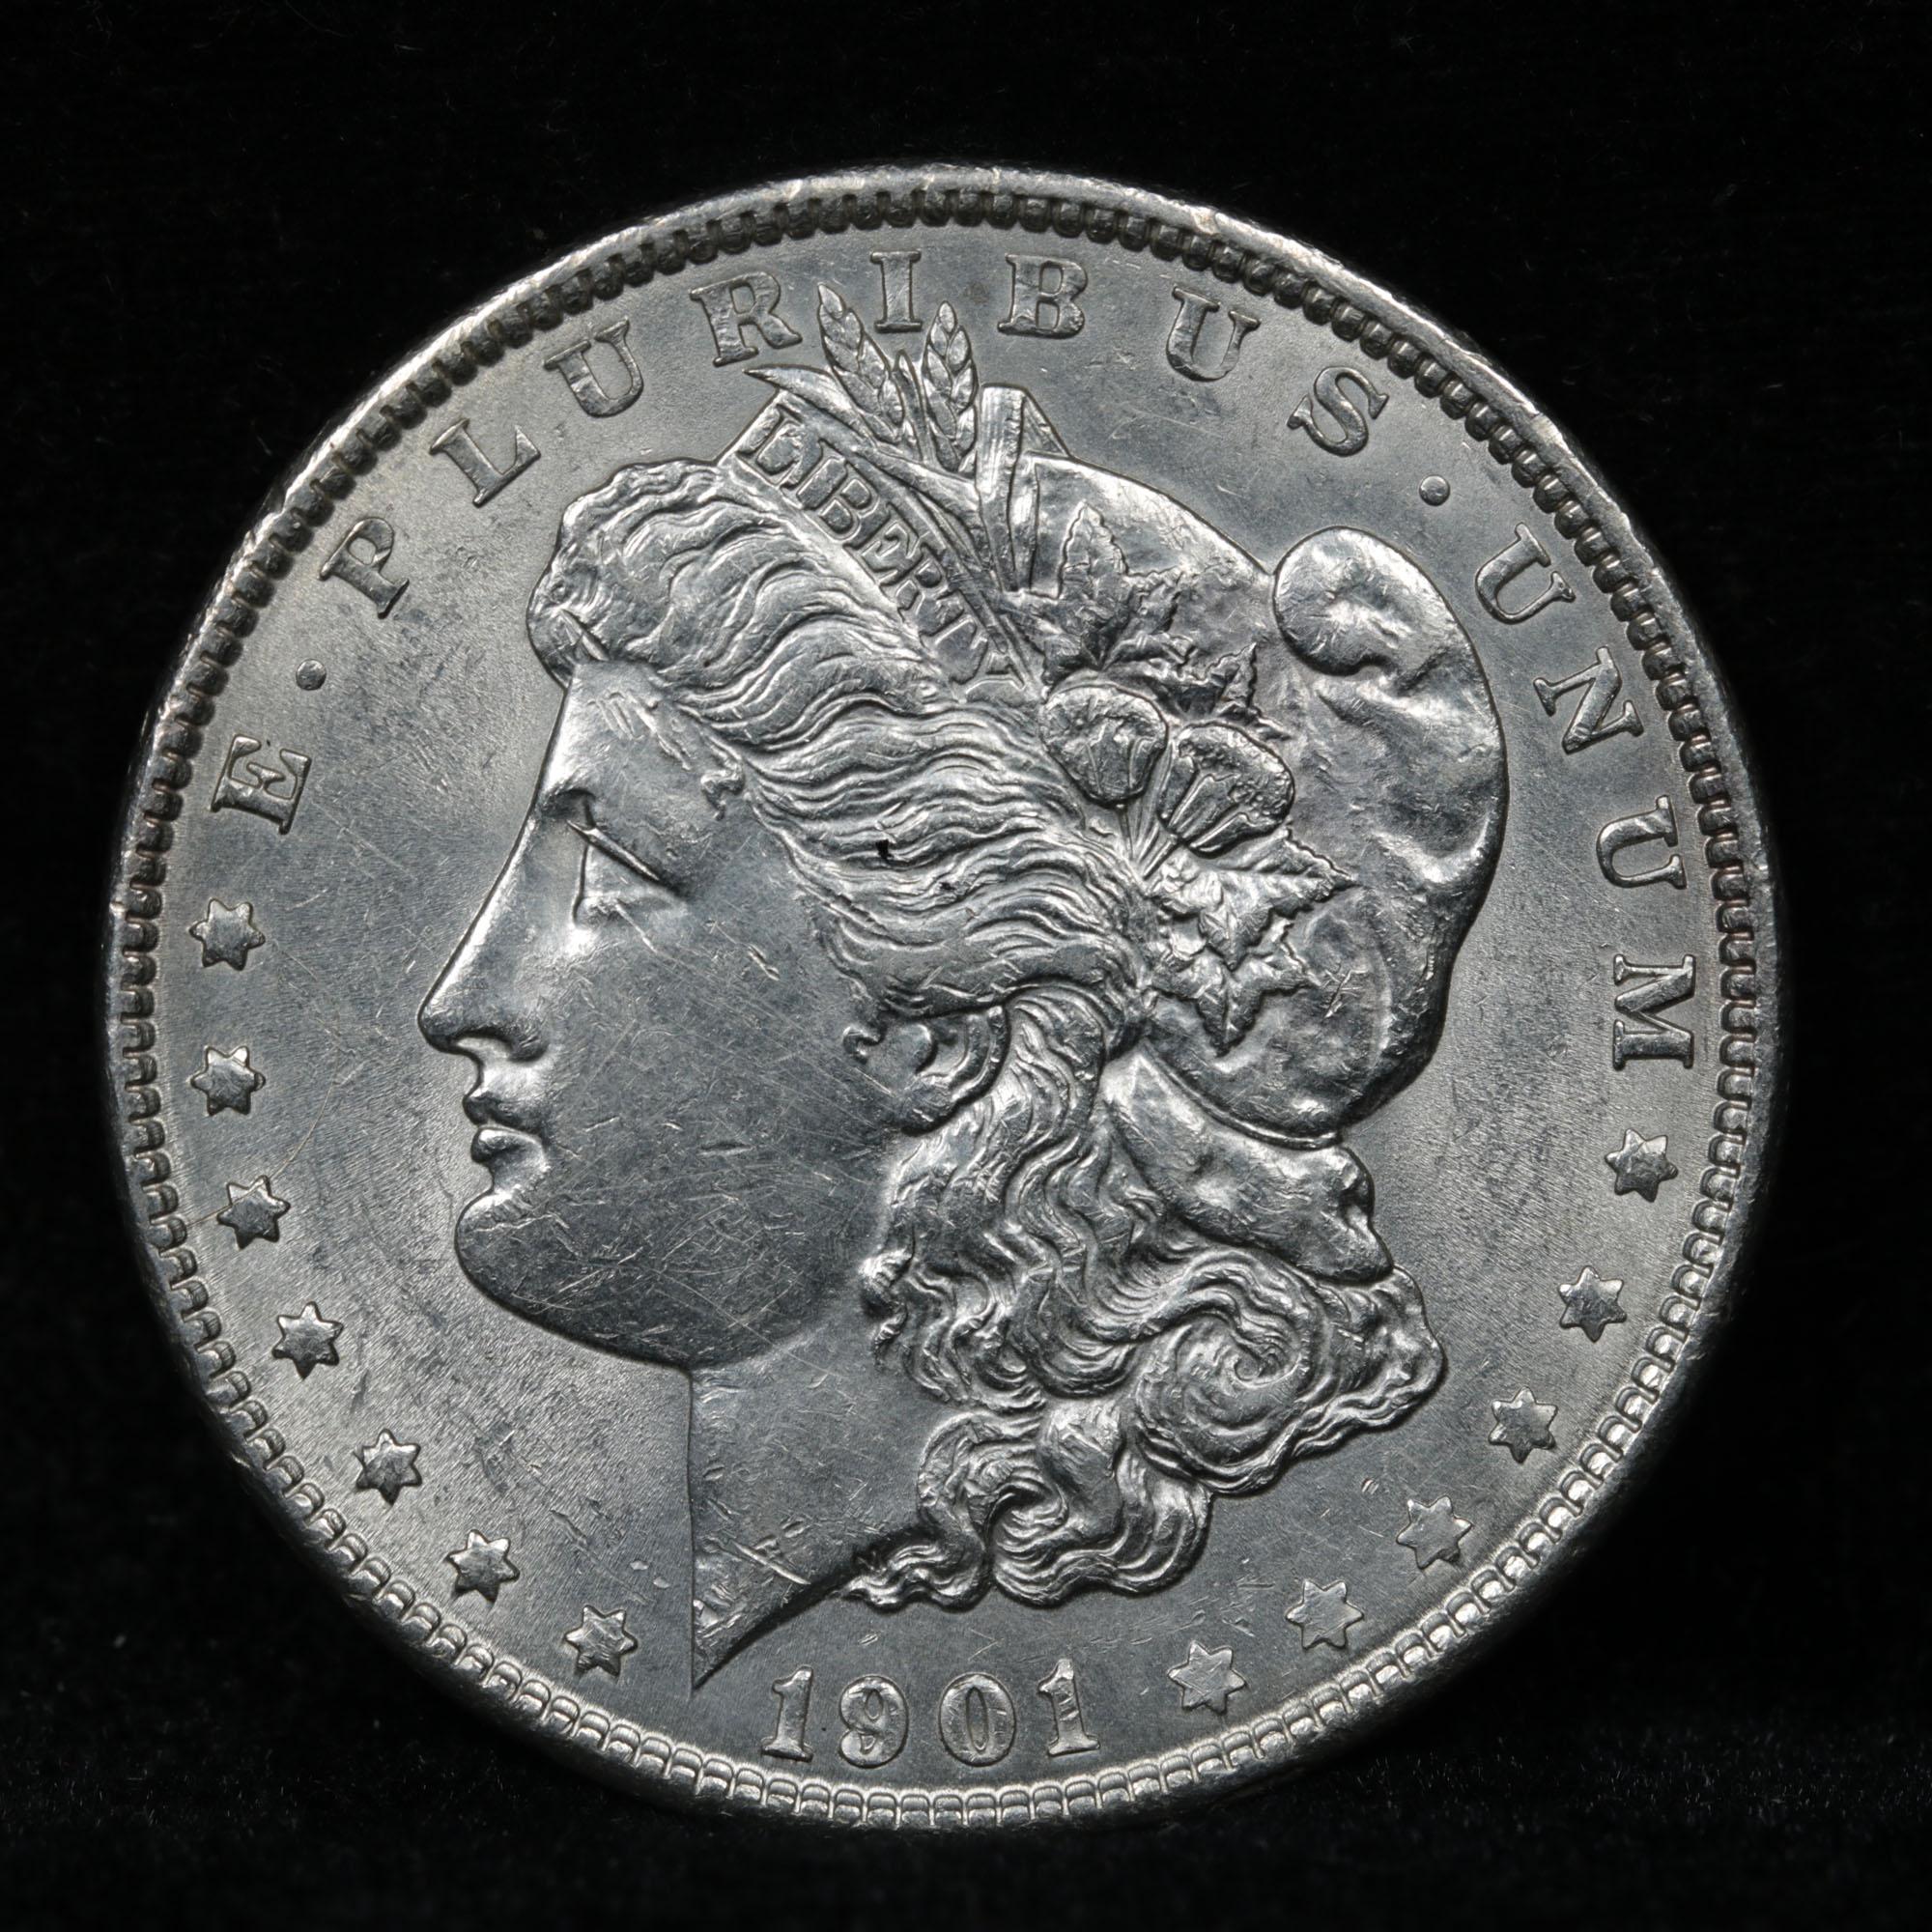 ***Auction Highlight*** 1901-p Morgan Dollar $1 Graded Select+ Unc By USCG (fc)